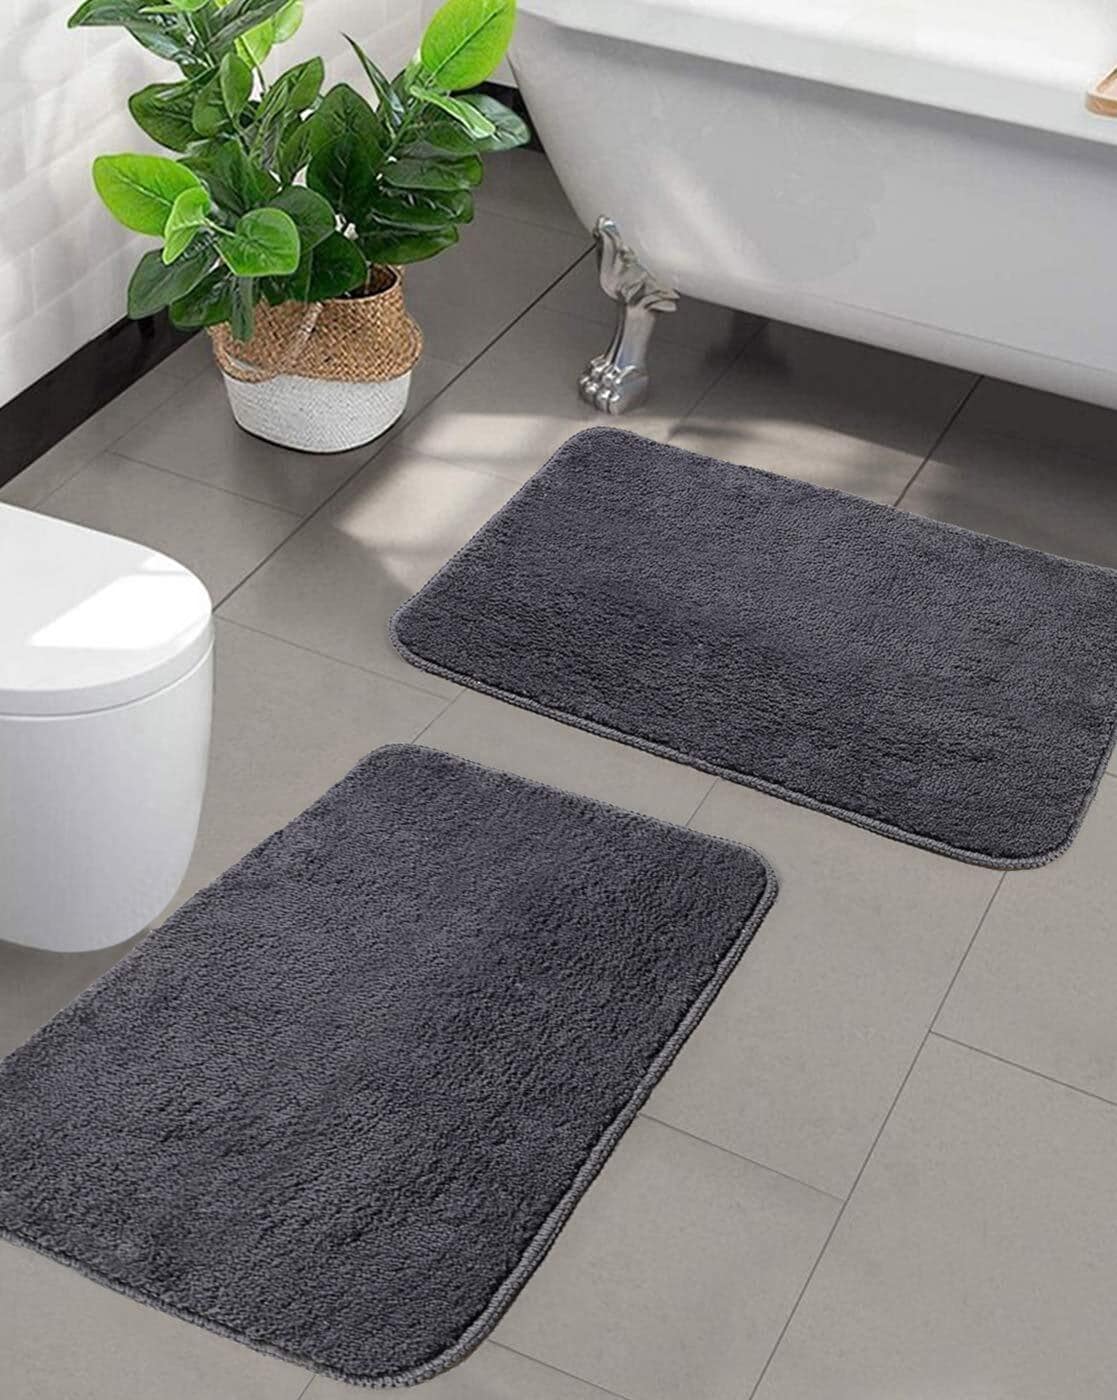 Buy Saral Home Multicolor Polyester 2571 GSM Bath Mats - Set of 2